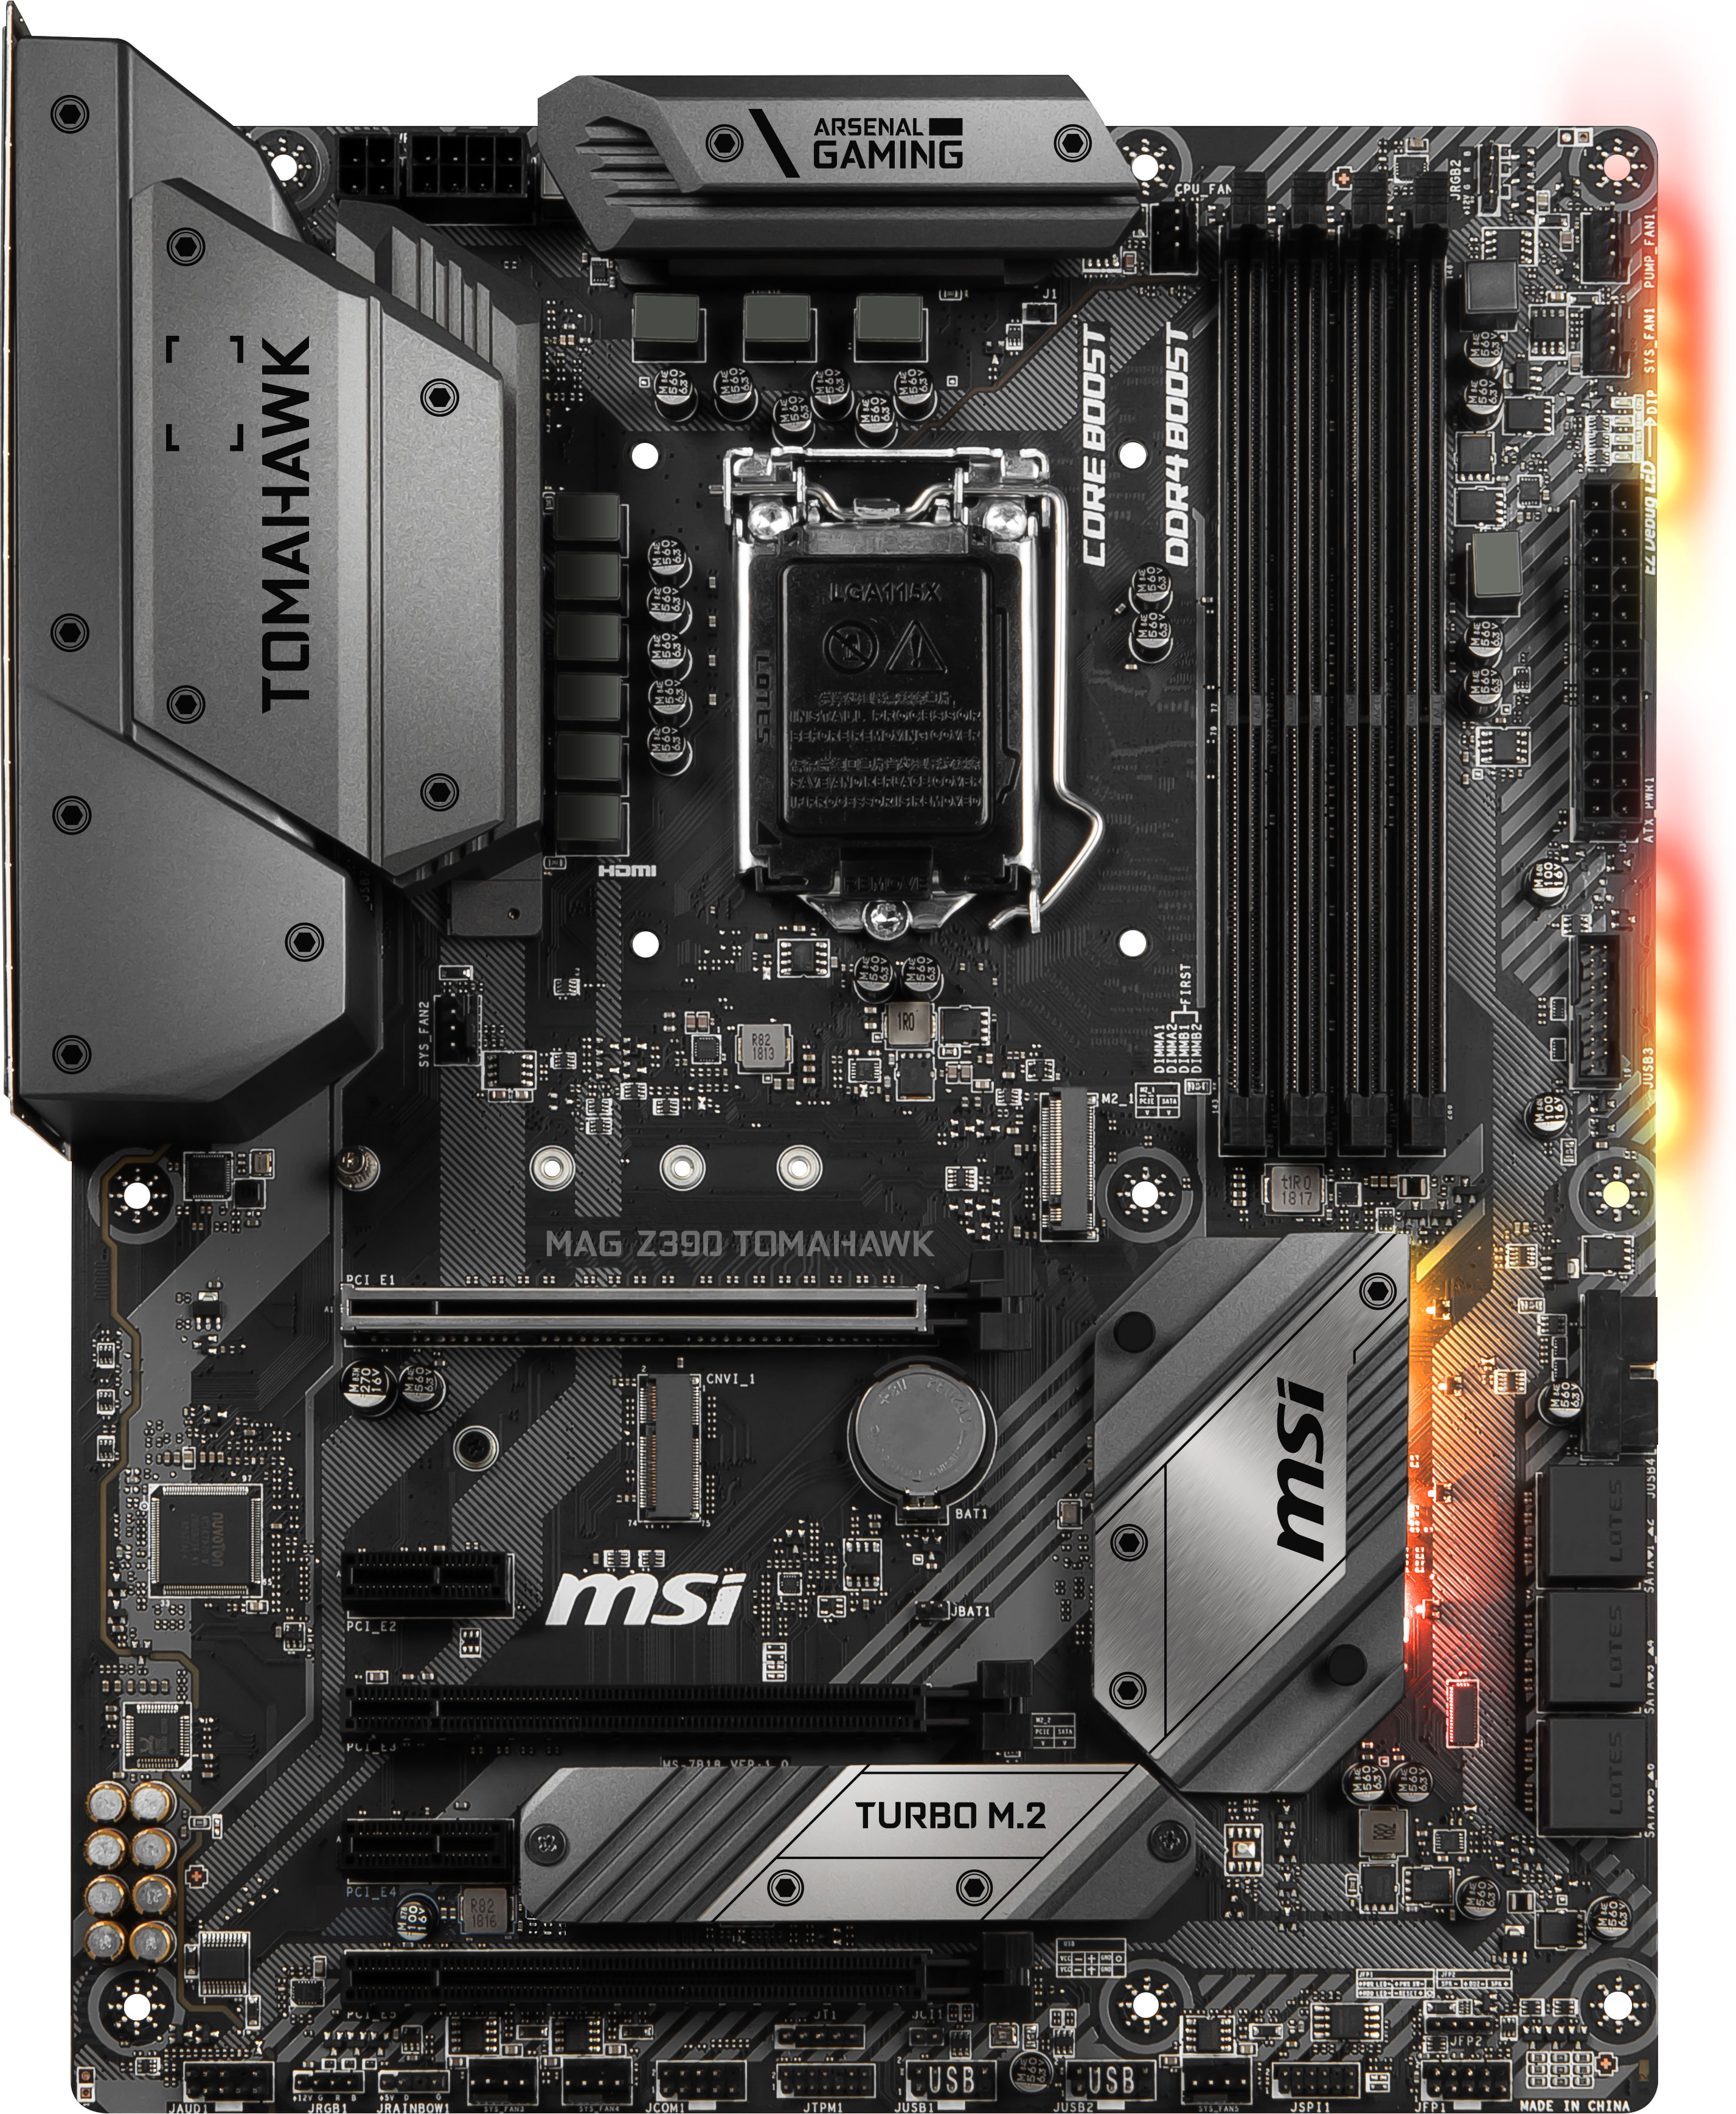 MSI MAG Z390 Tomahawk - Intel Z390 Motherboard Overview: 50